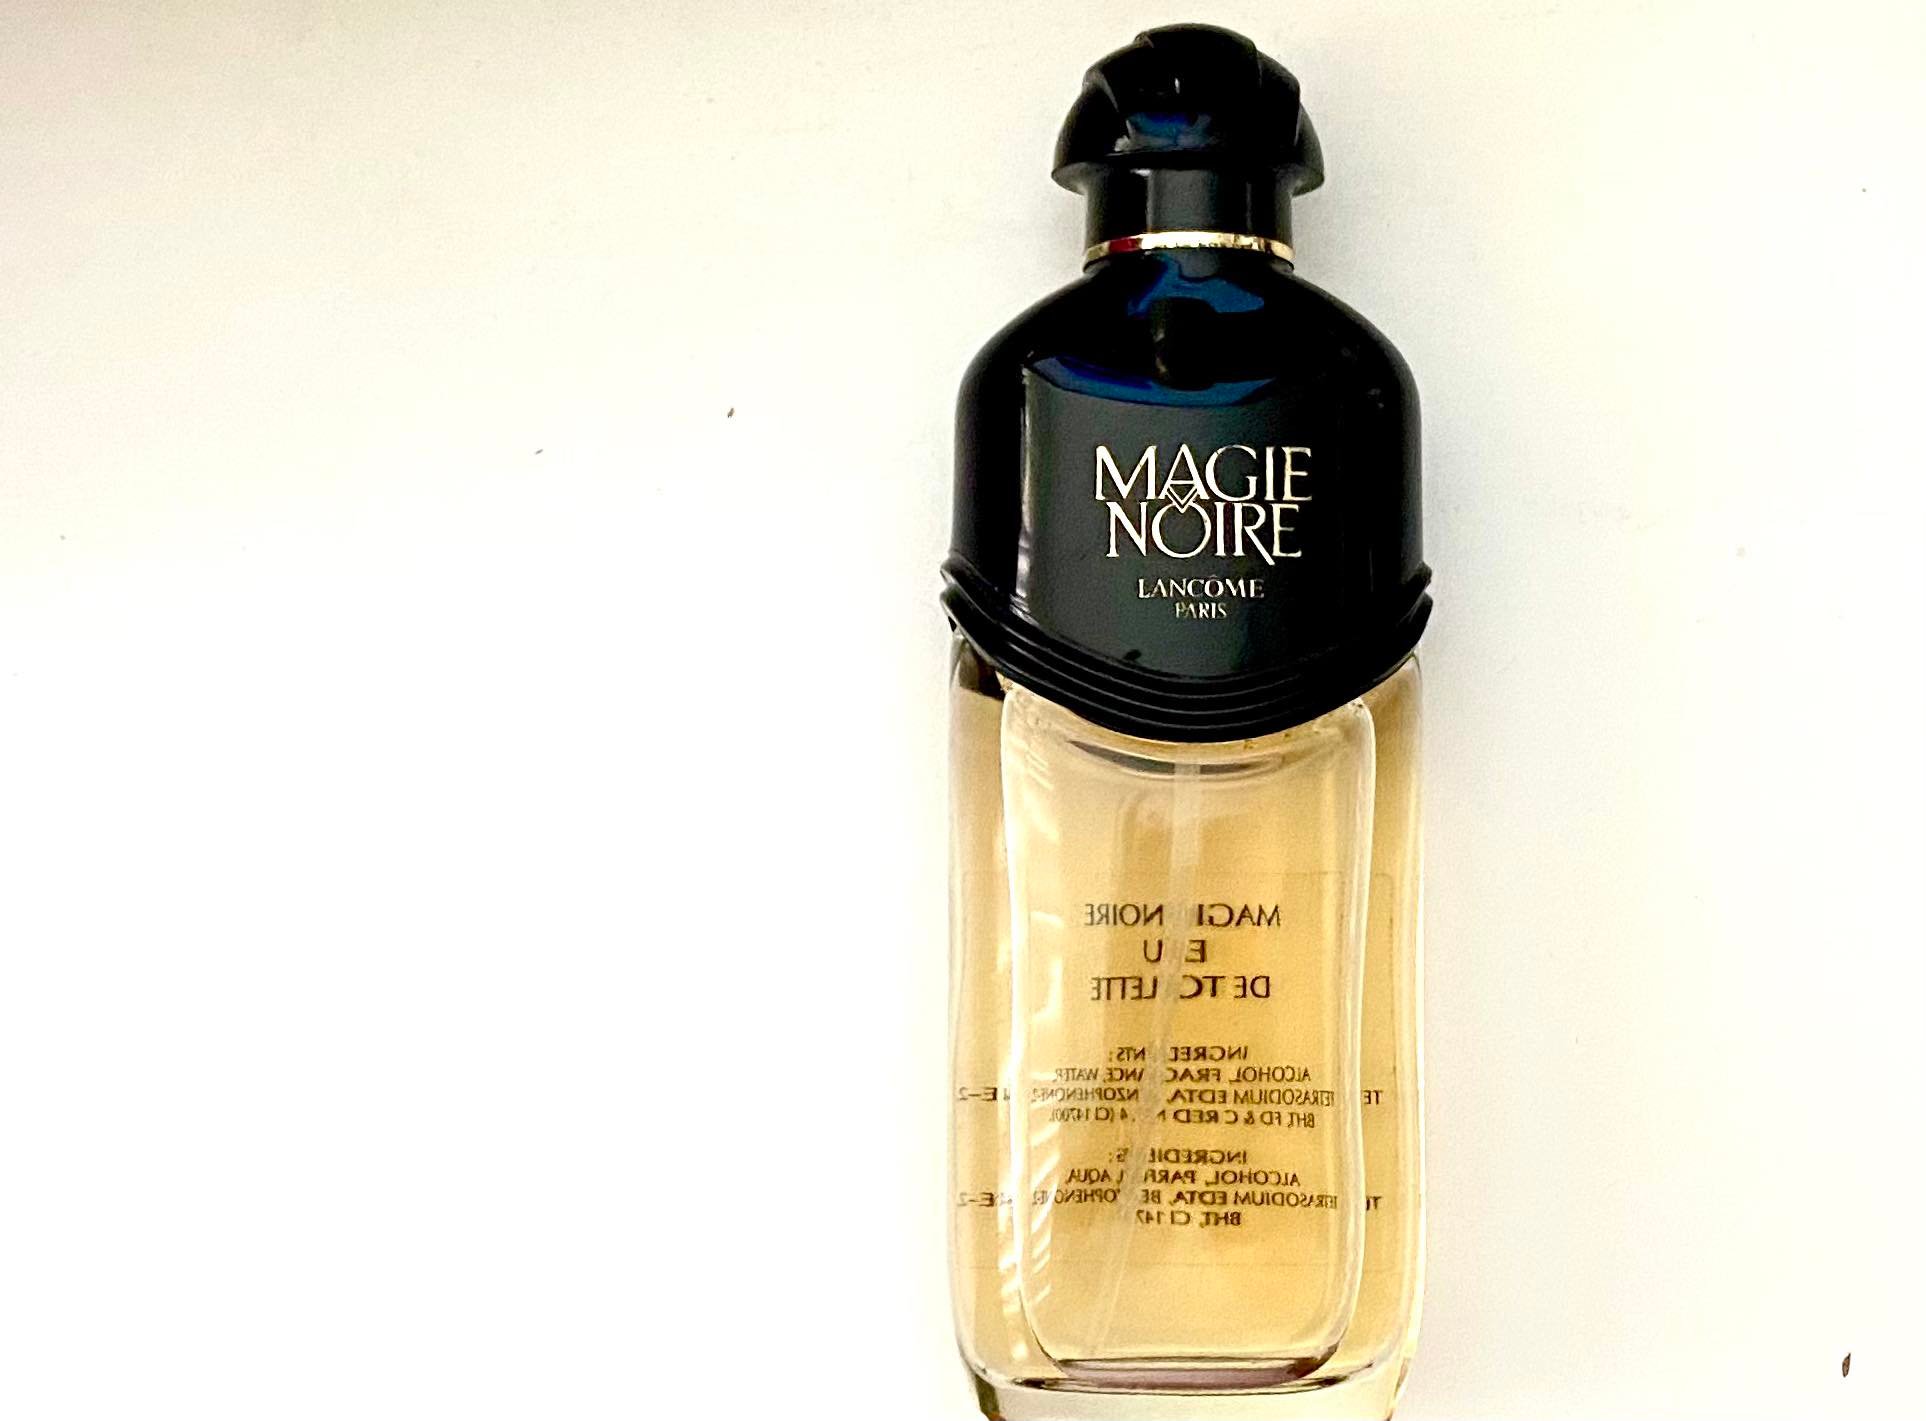 Magie Noire by Lancome | Posse Floral Remembering the Perfume Chypre